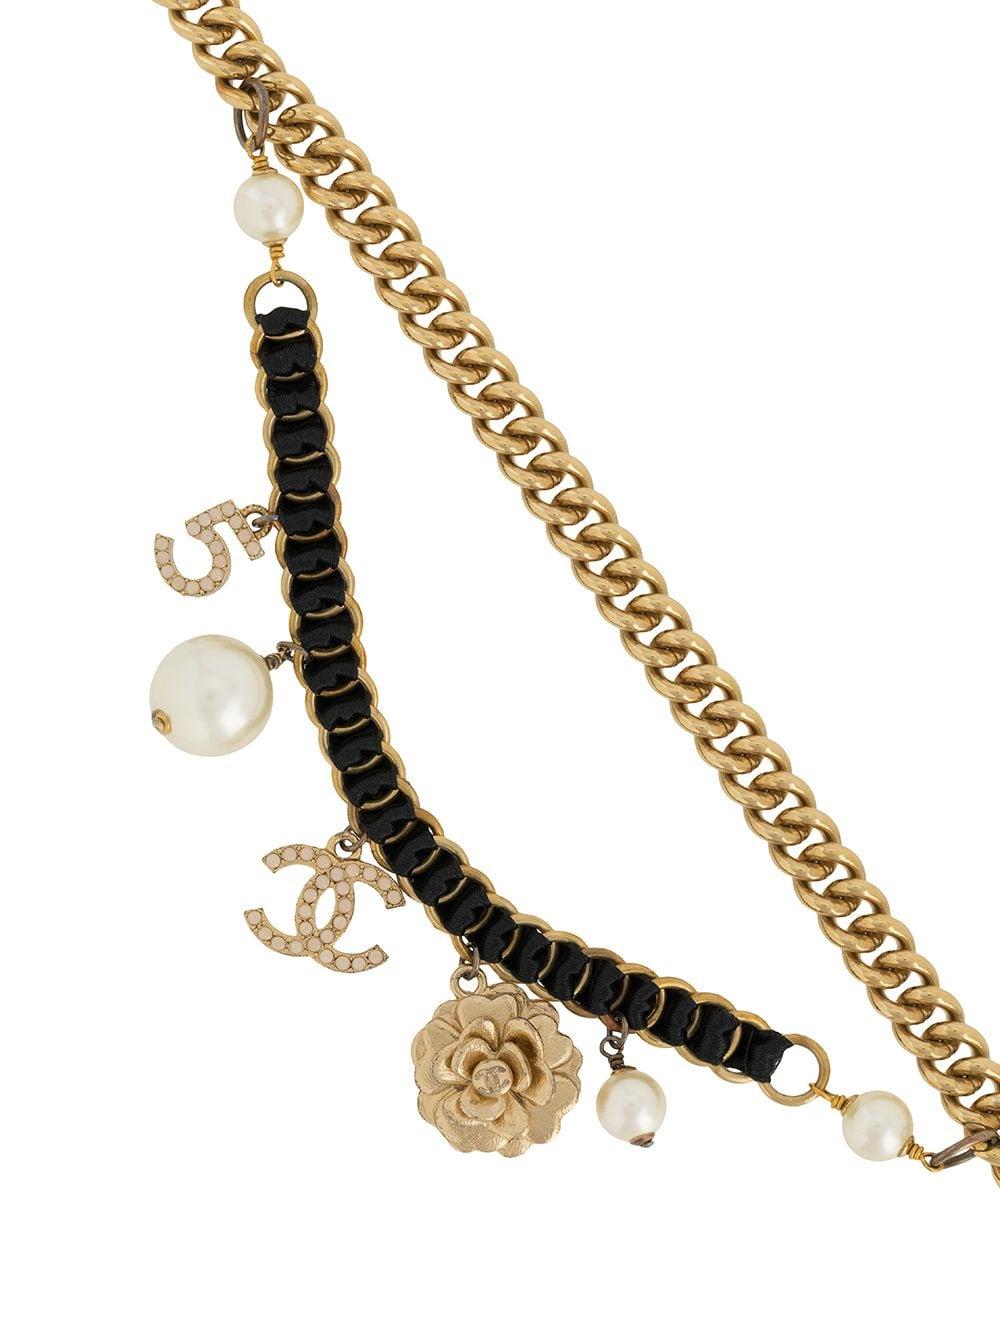 Chanel necklace featuring charms, faux ivory pearl beads, logo charms, gold-plated hardware, and a logo back plaque.  Could be worn as a belt too.
In excellent vintage condition  Made in France. 
Circa 2003s
Length When Open 35.4in. (90cm)
We